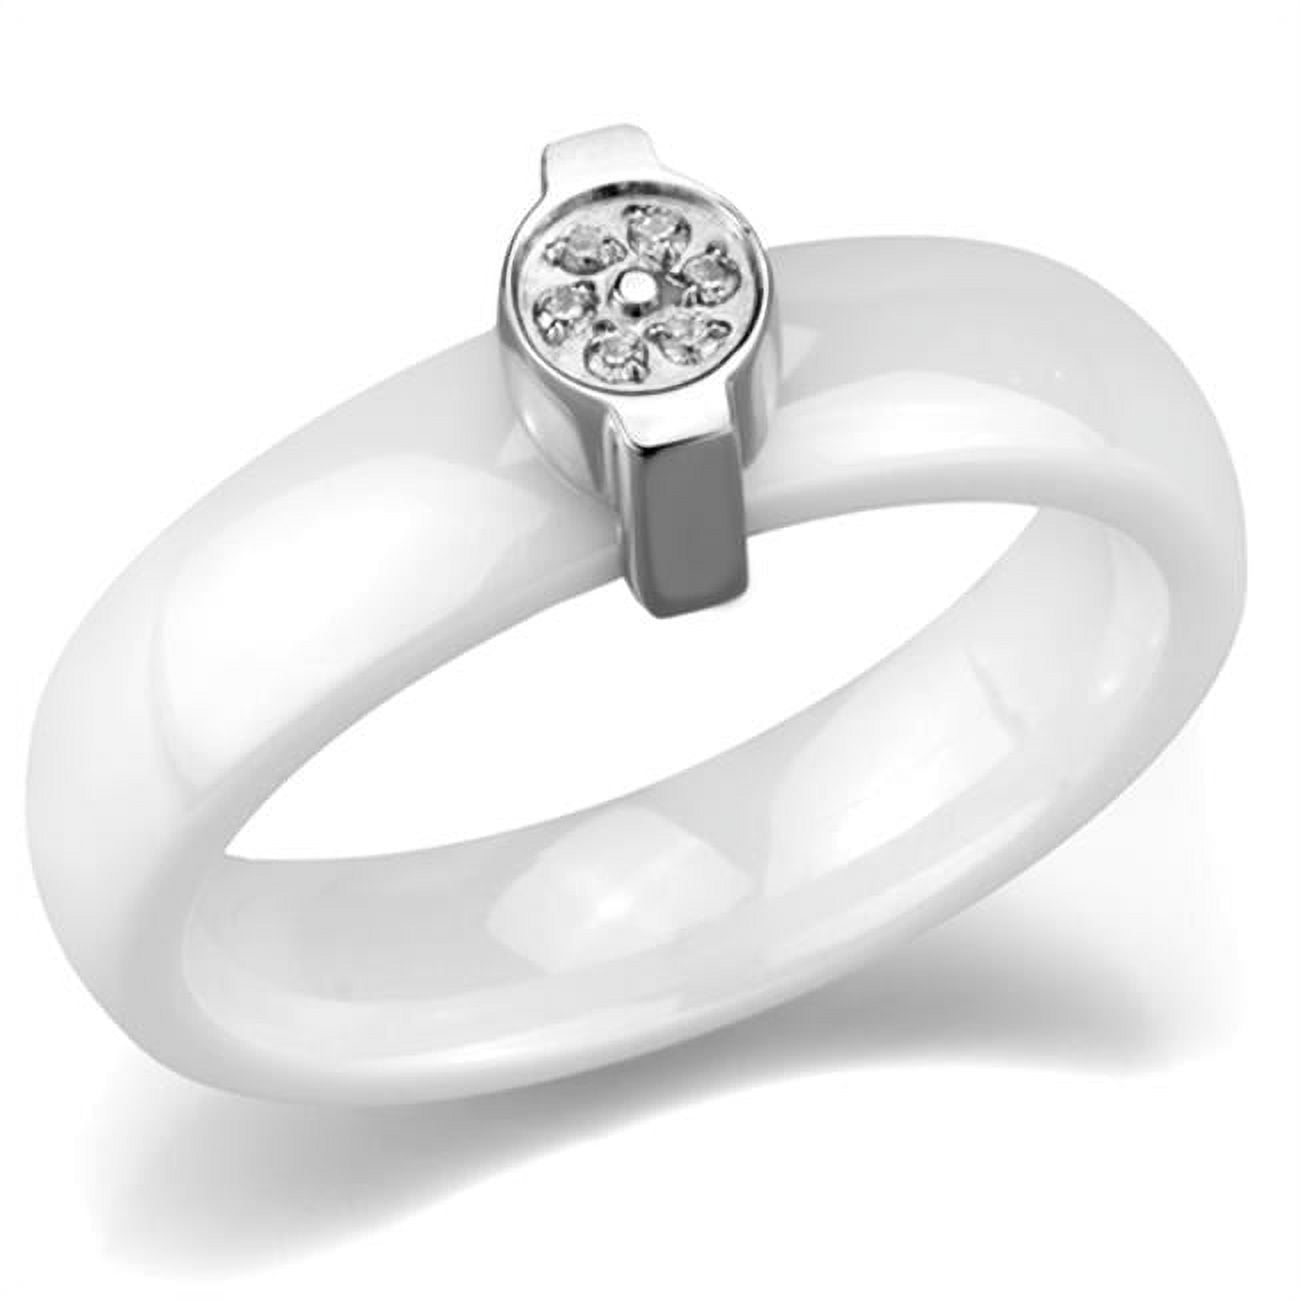 Picture of Alamode 3W958-6 Women High Polished Stainless Steel Ring with Ceramic in White - Size 6